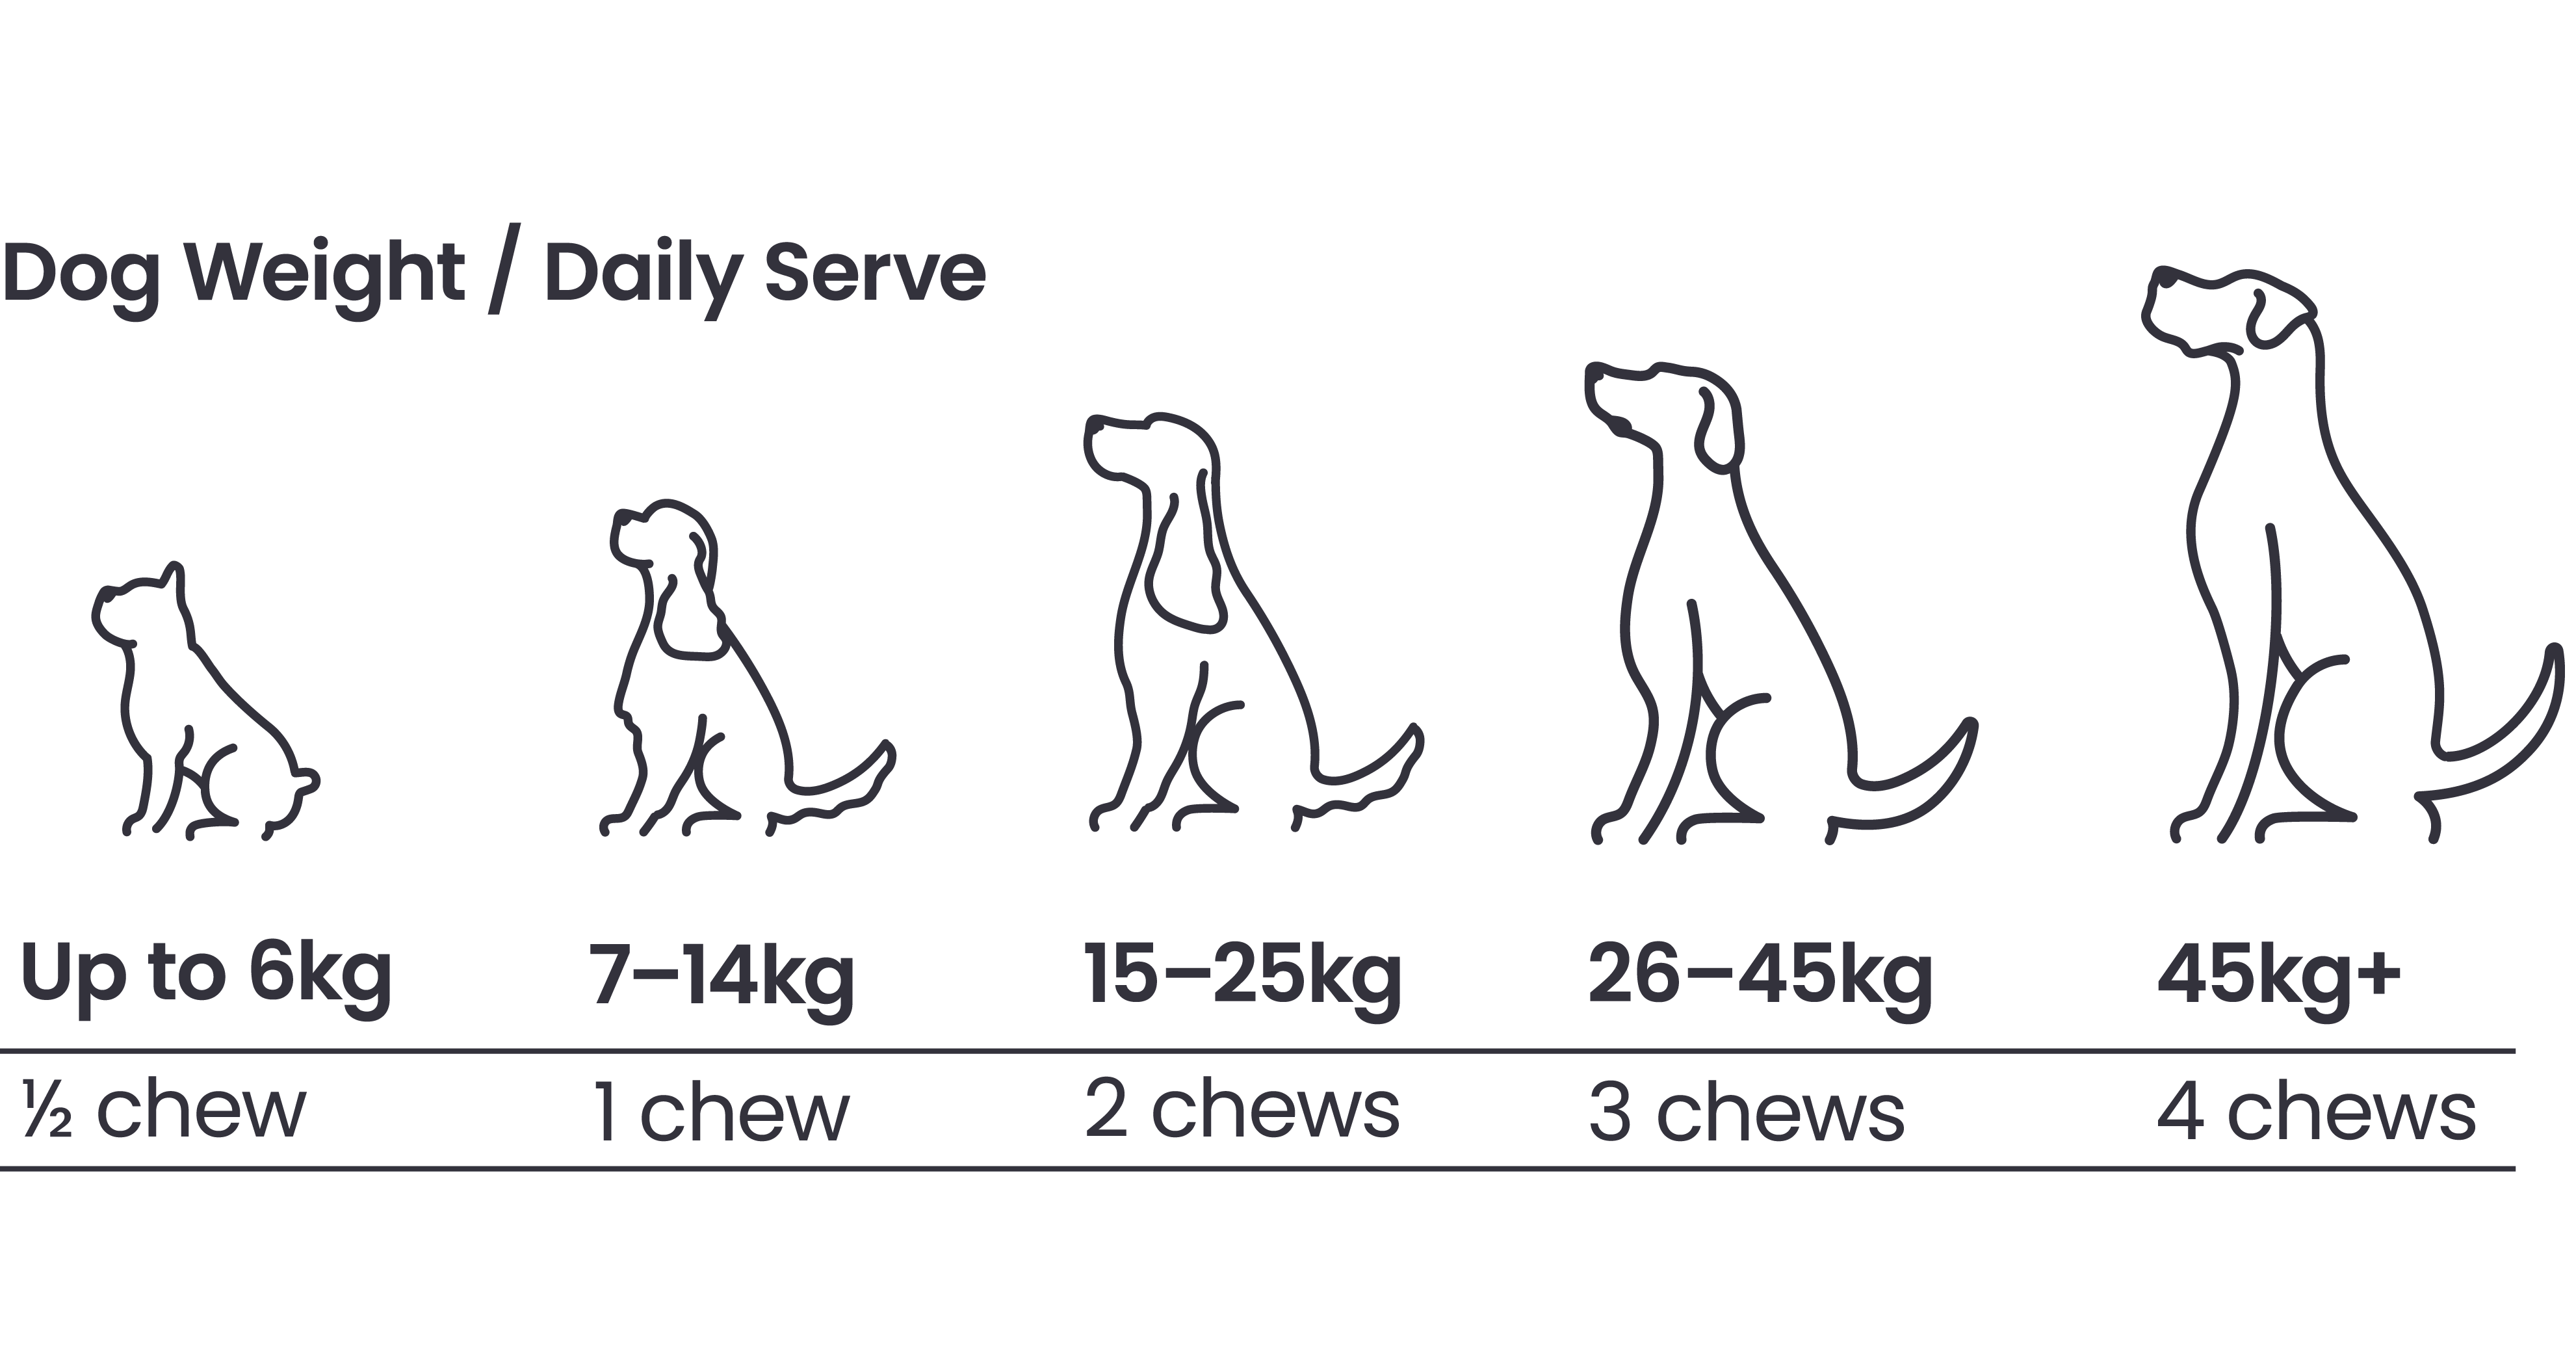 ZamiPet Relax & Calm feeding guide. For dogs up to 6kg, 1/2 chew per day. For 7-14kg dogs, 1 chew per day. For 15-25kg dogs, 2 chews per day. For 26-45kg dogs, 3 chews per day.For dogs 45kg and over, 4 chews per day. 